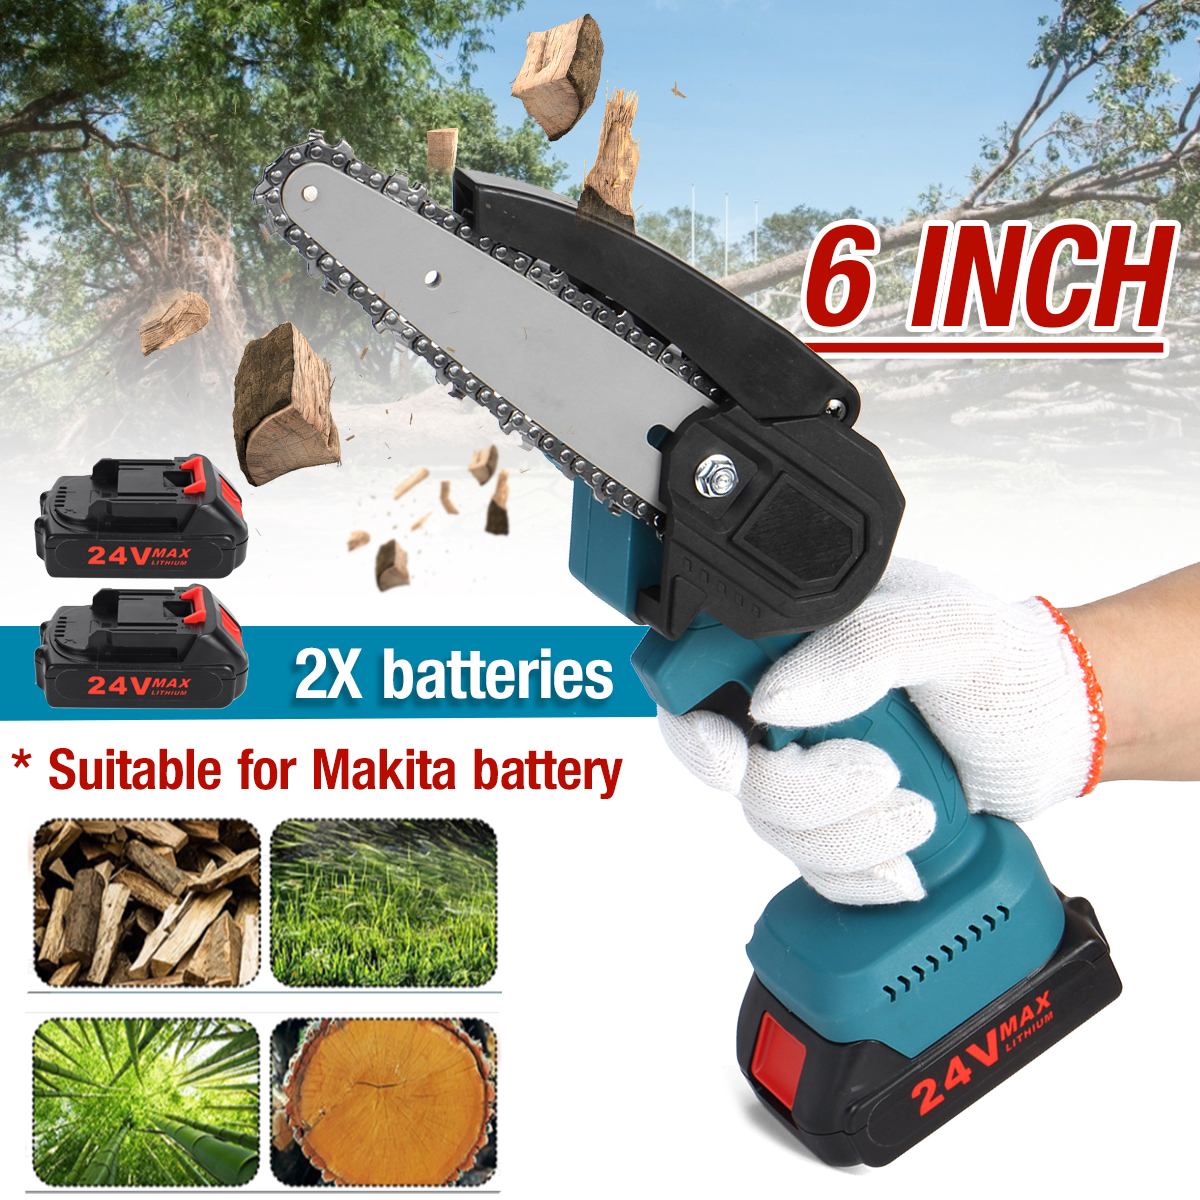 6-Inch-Mini-Electric-Chain-Saw-Rechargeable-Woodworking-Chainsaw-Garden-Power-Tools-1893524-2